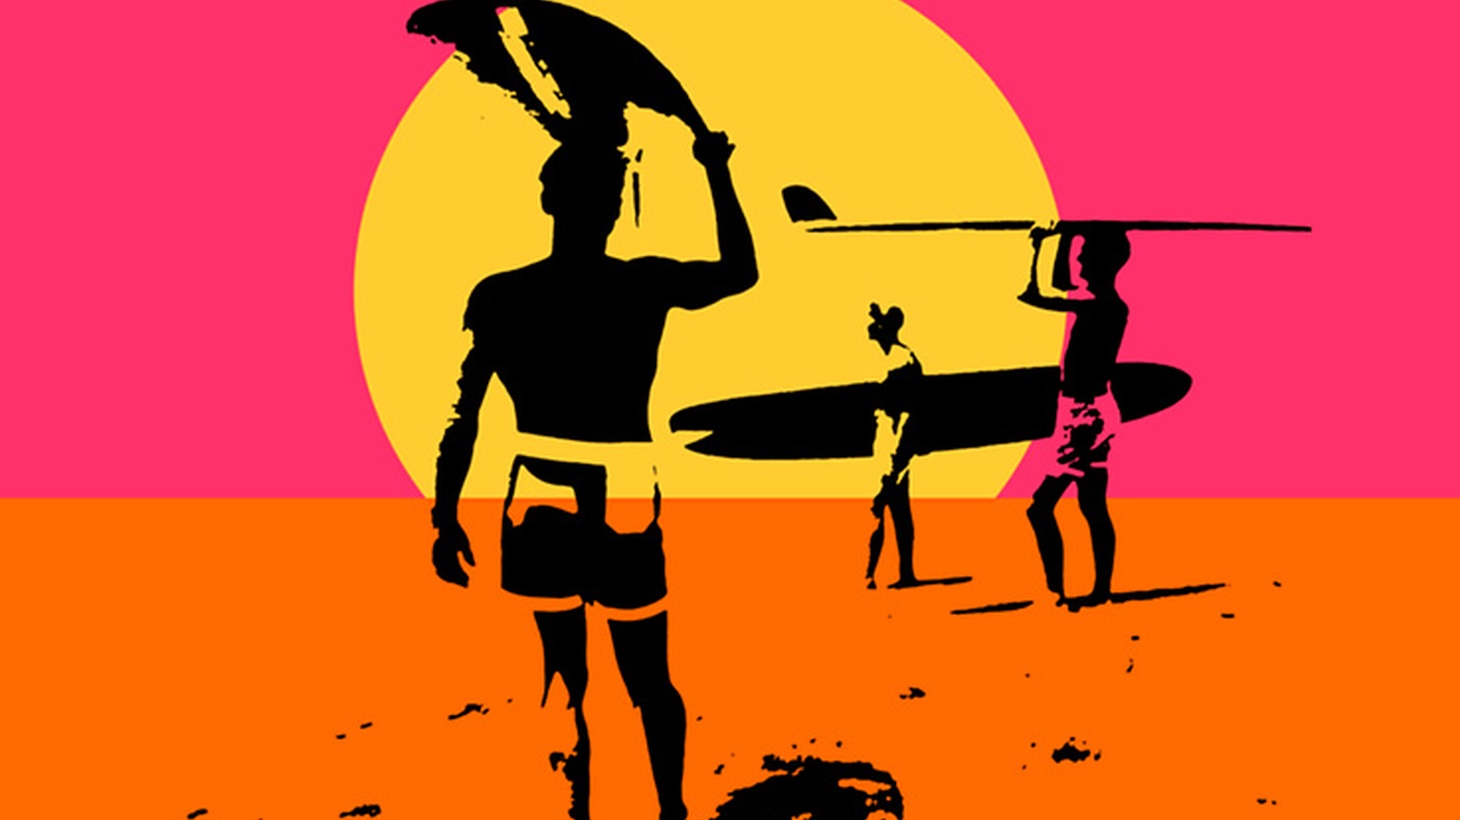 A look at back at The Endless Summer -- the most influential surf movie ever -- 50 years after it came out.